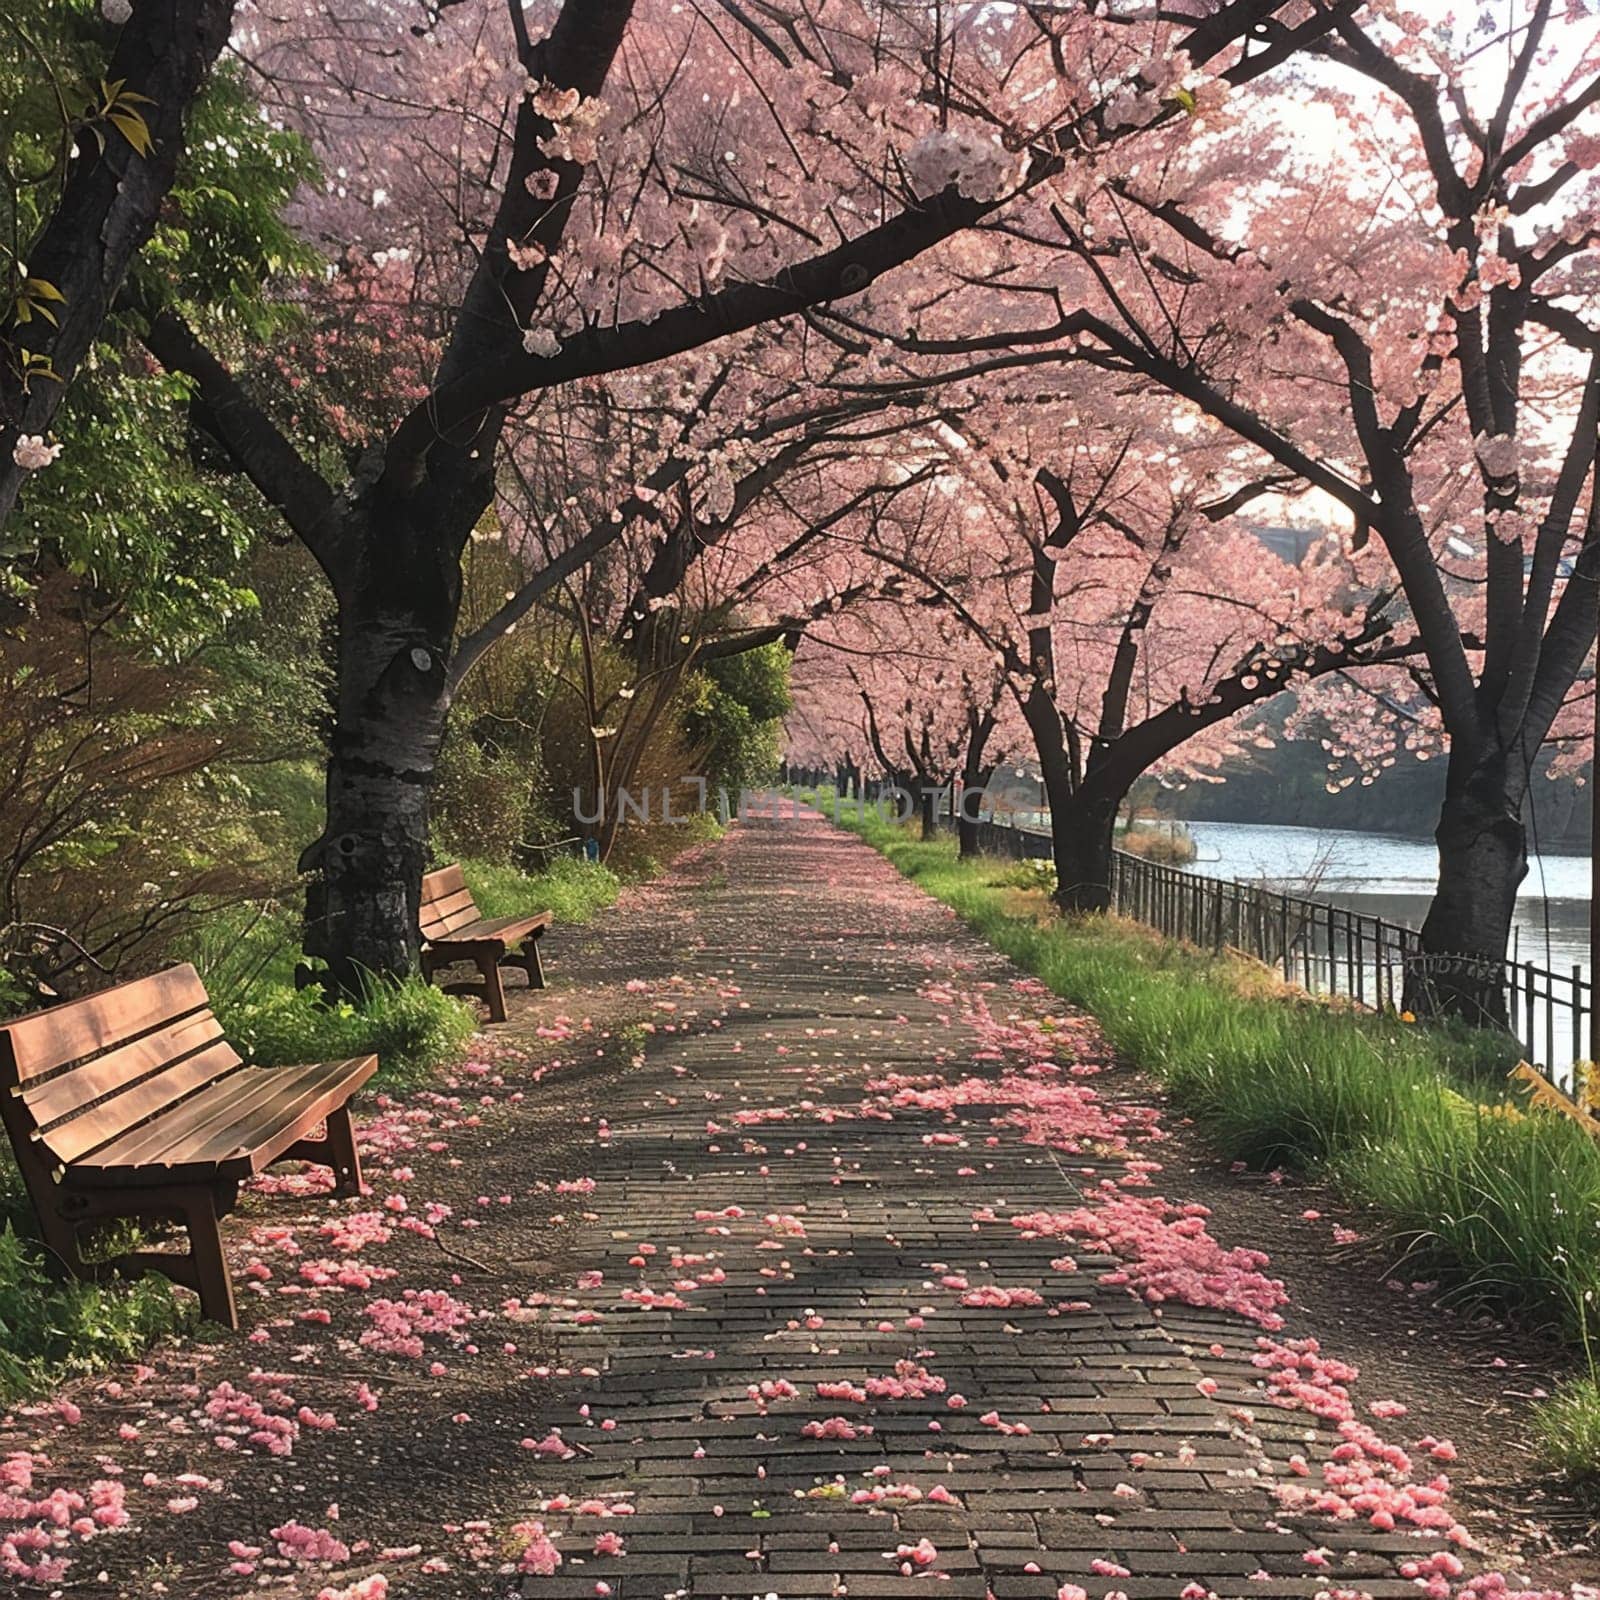 A path lined with cherry blossoms in full bloom, representing renewal and beauty.